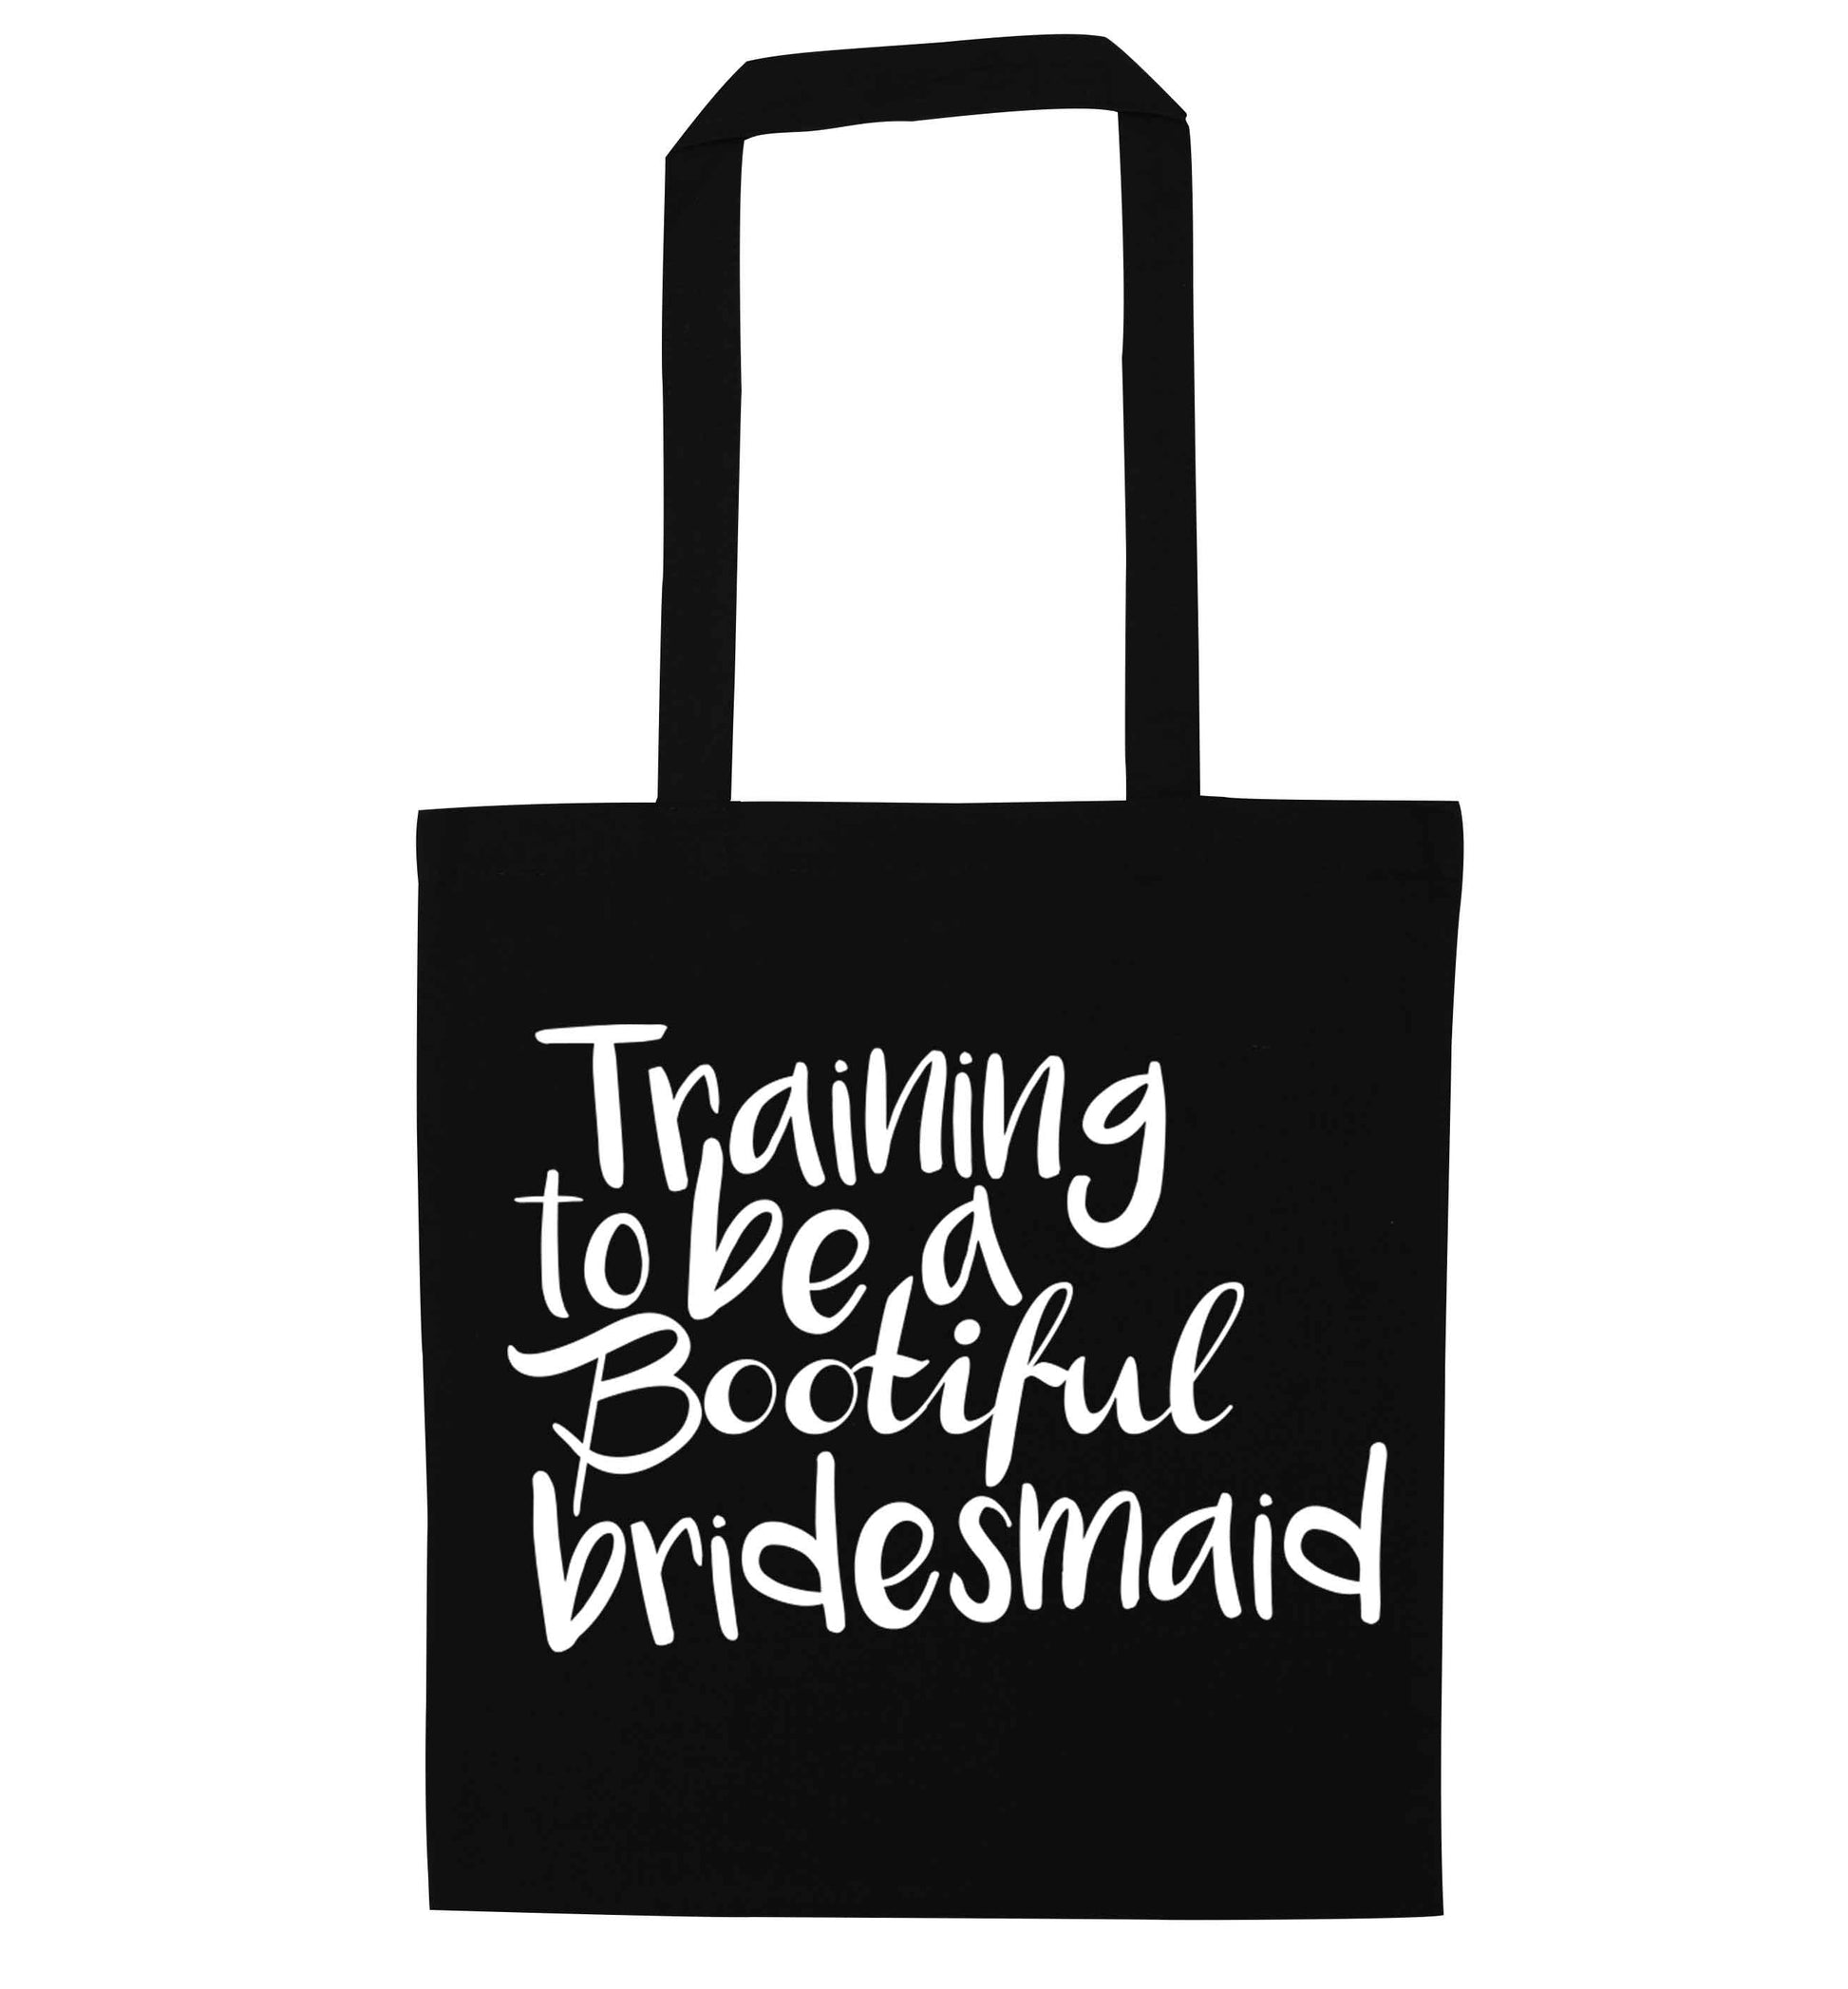 Get motivated and get fit for your big day! Our workout quotes and designs will get you ready to sweat! Perfect for any bride, groom or bridesmaid to be!  black tote bag